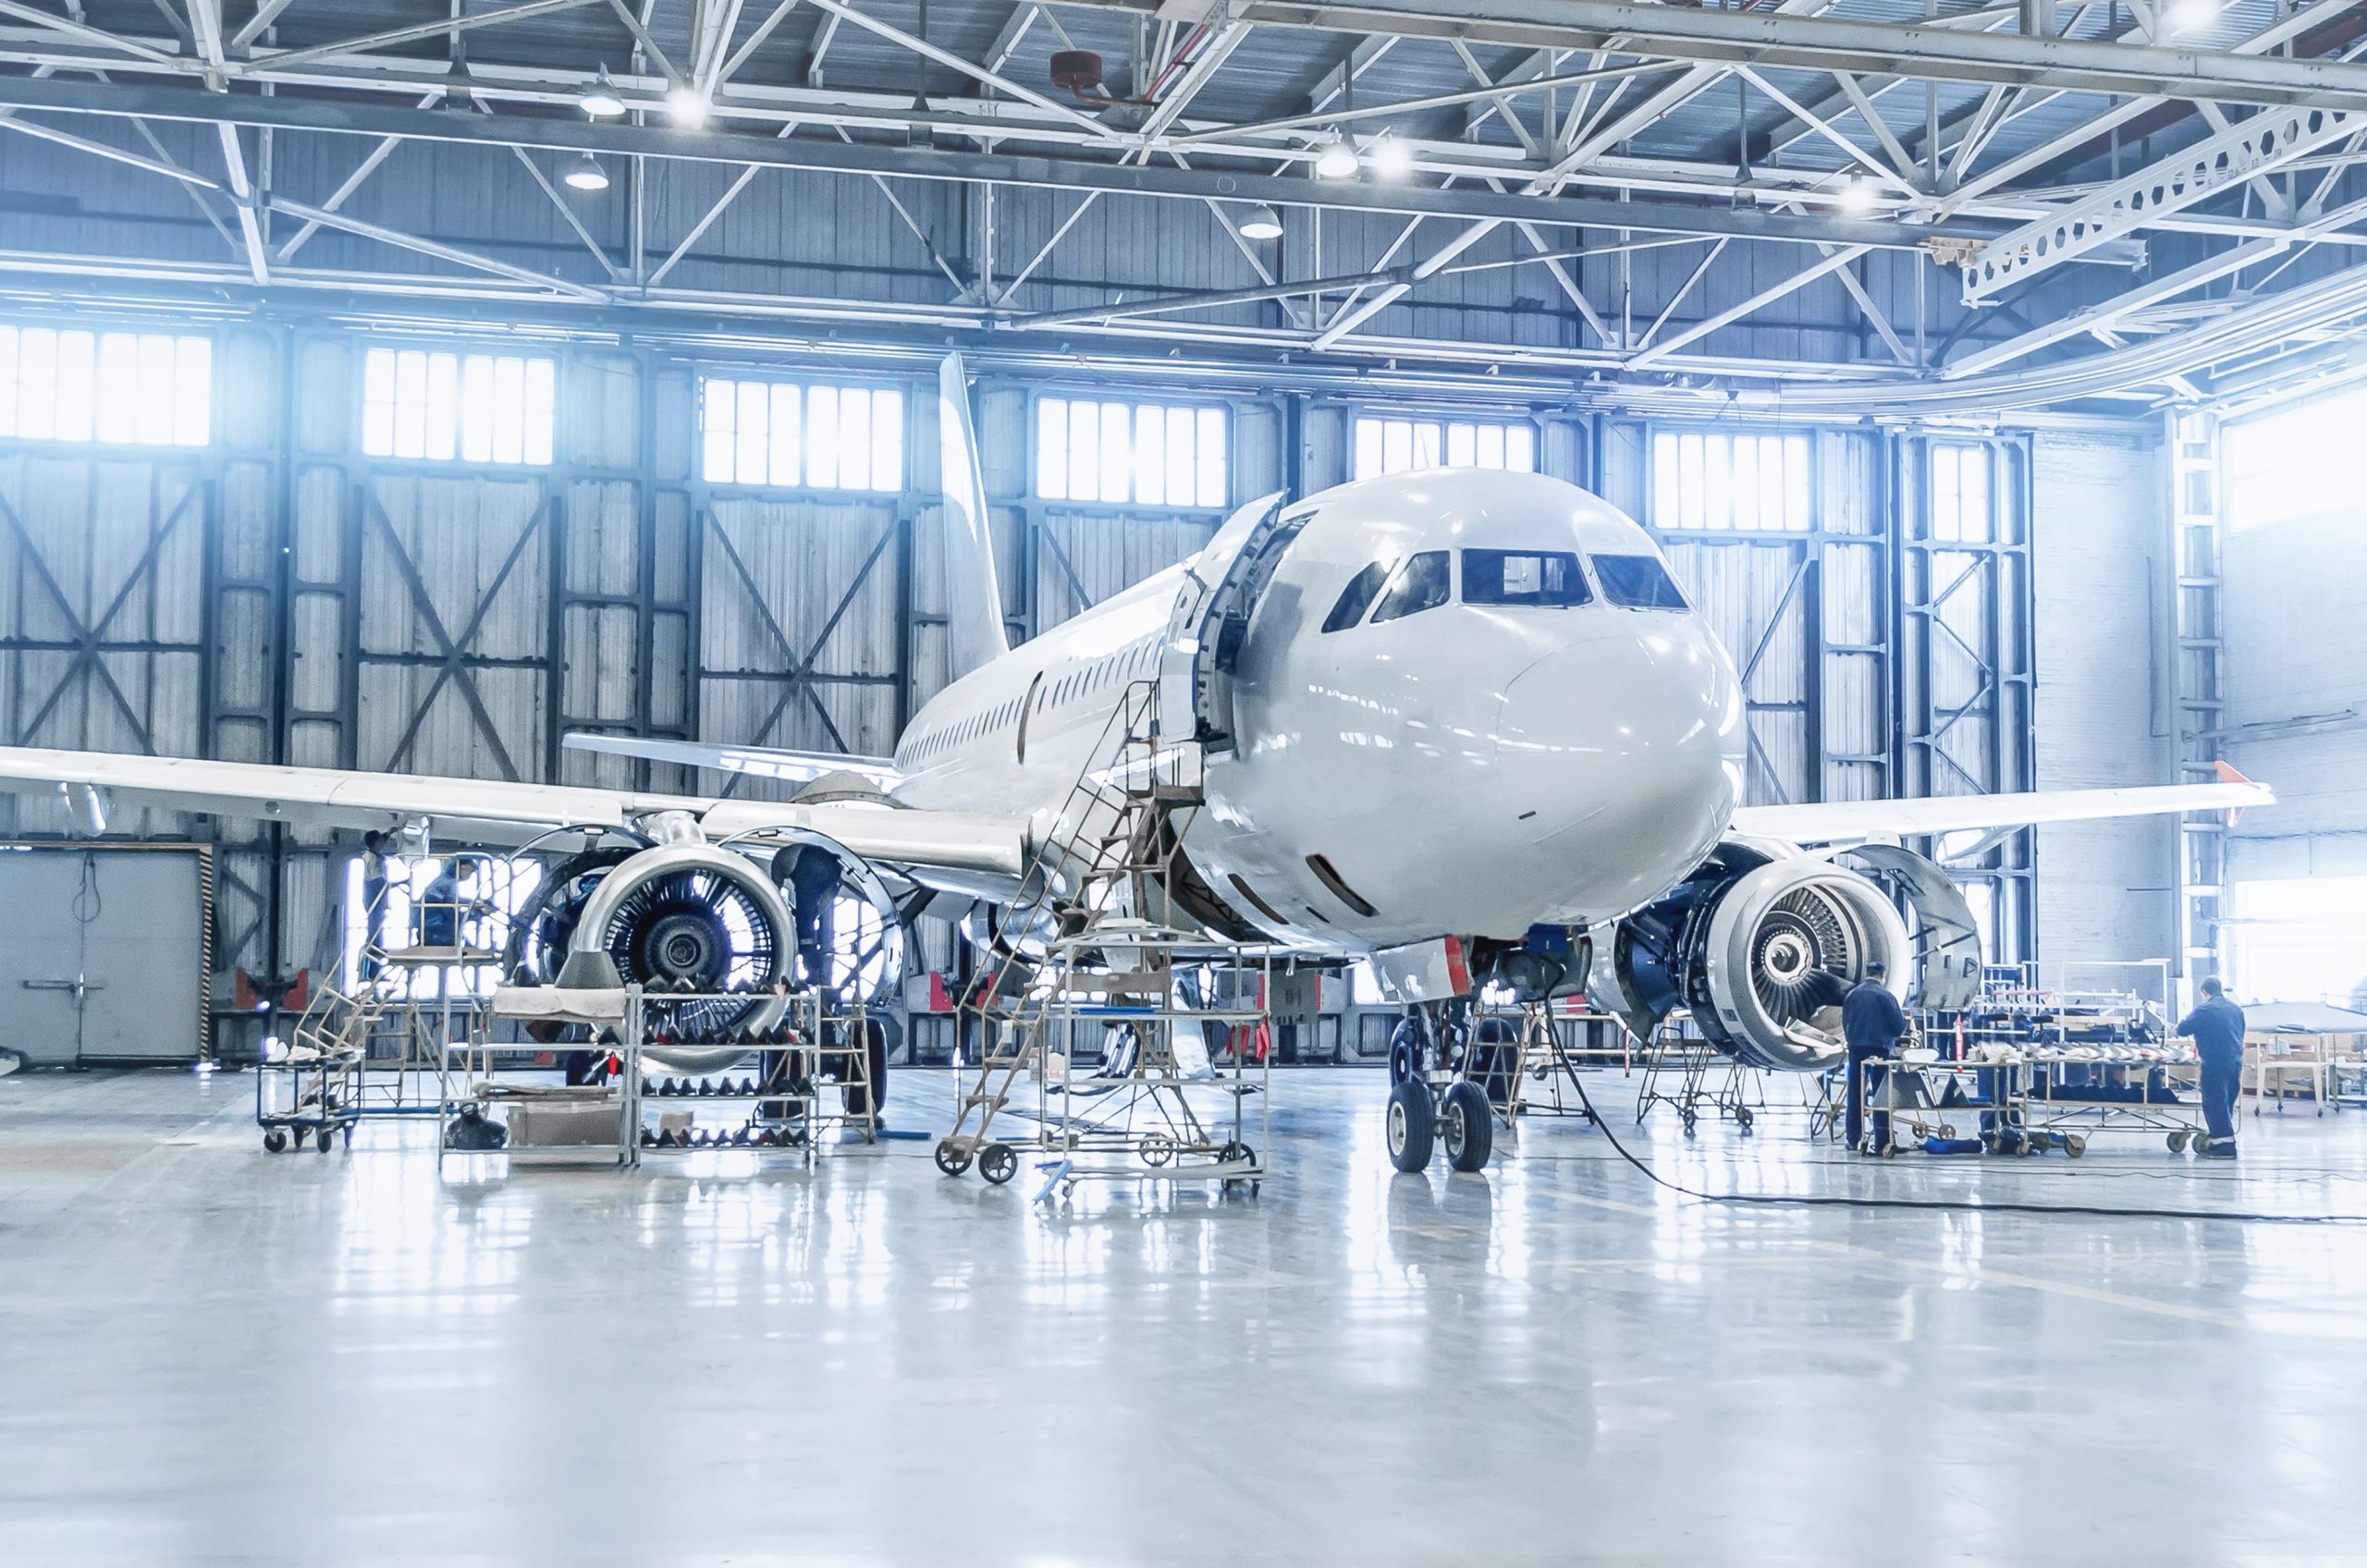 Wright International – new identity and final stage of integration into FL Technics, a global MRO network